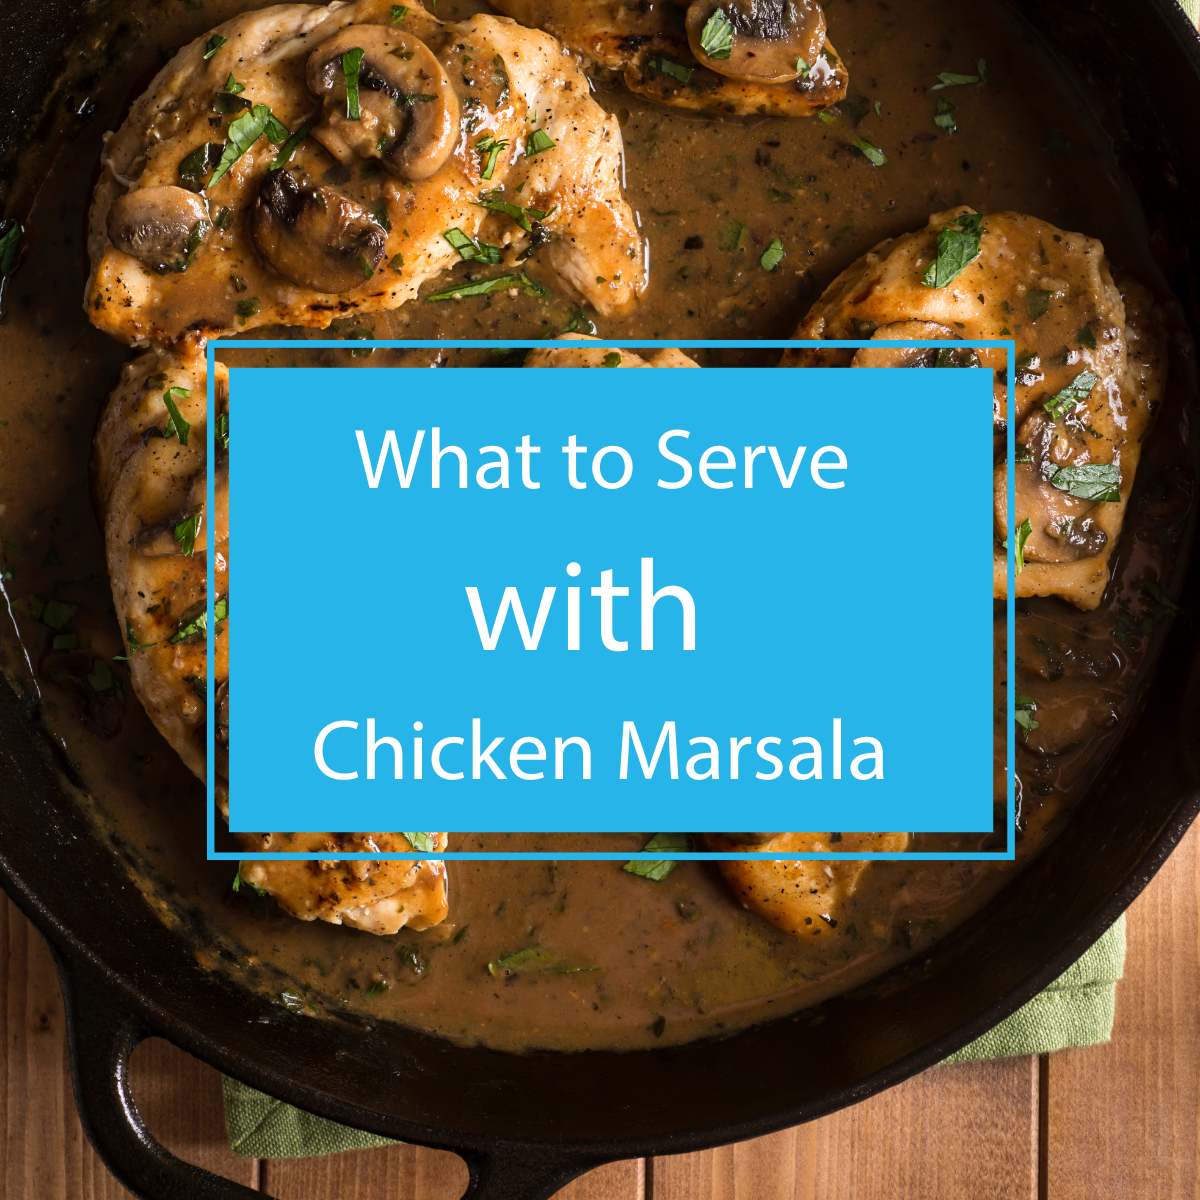 What to Serve with Chicken Marsala